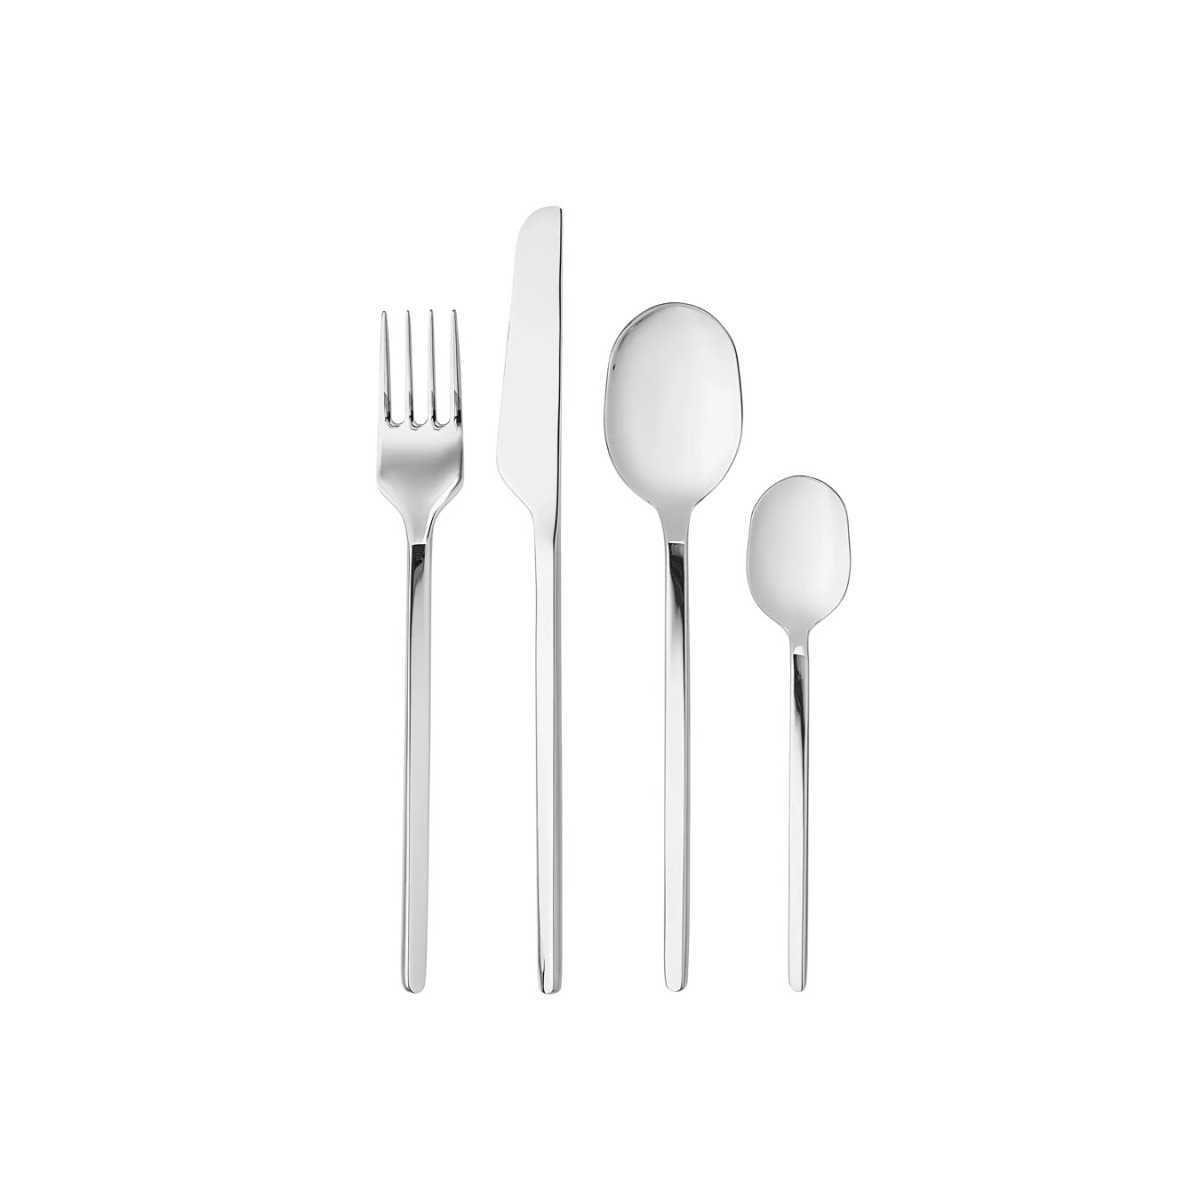 BOLIA Carved Cutlery 1set